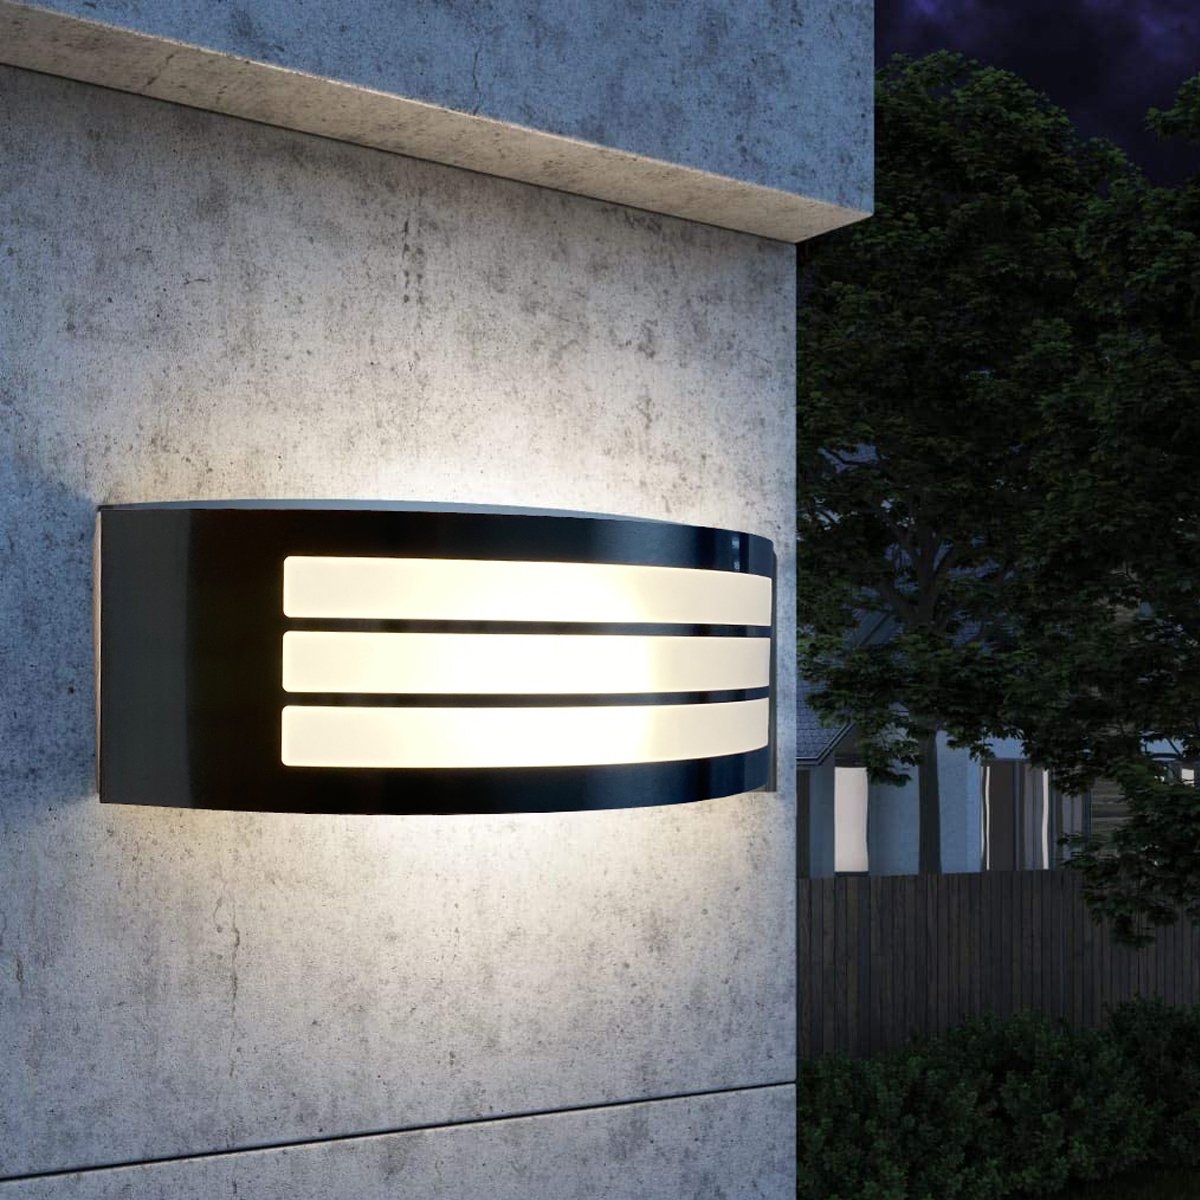 This stylish Striker outdoor light boasts a polycarbonate shade, crafted from stainless steel and adorned with a series of narrow stripes. Its surface disperses the lamp's light uniformly, creating a tranquil, inviting ambiance both indoors and out.